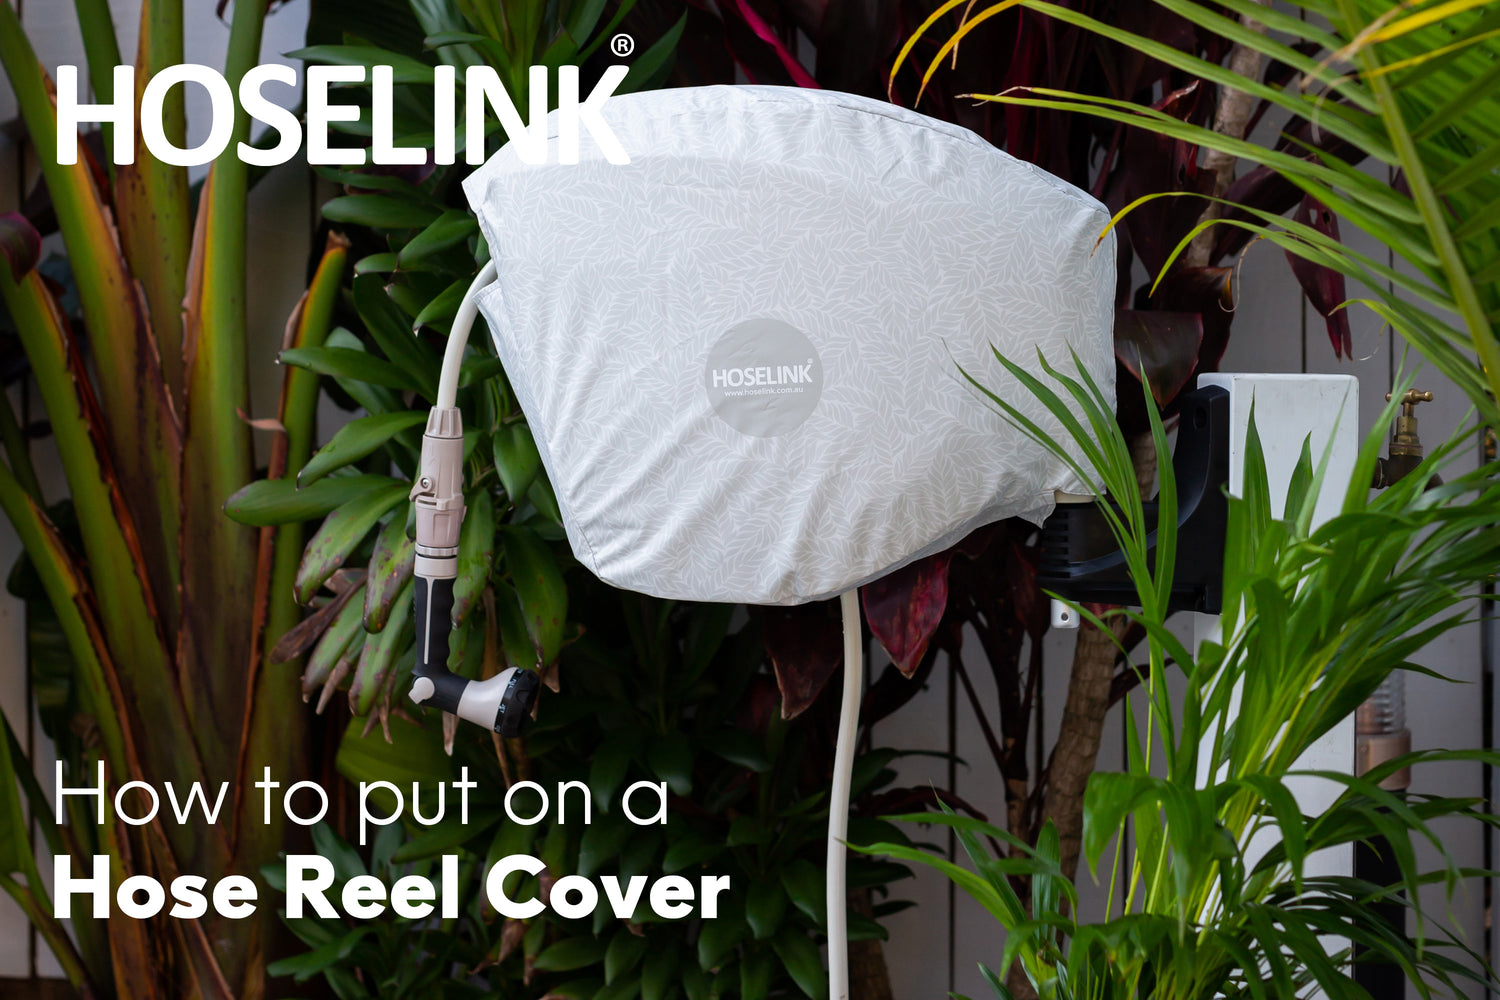 How to put on a Hose Reel Cover | Hoselink Retractable Hose Reel | Optional Accessory